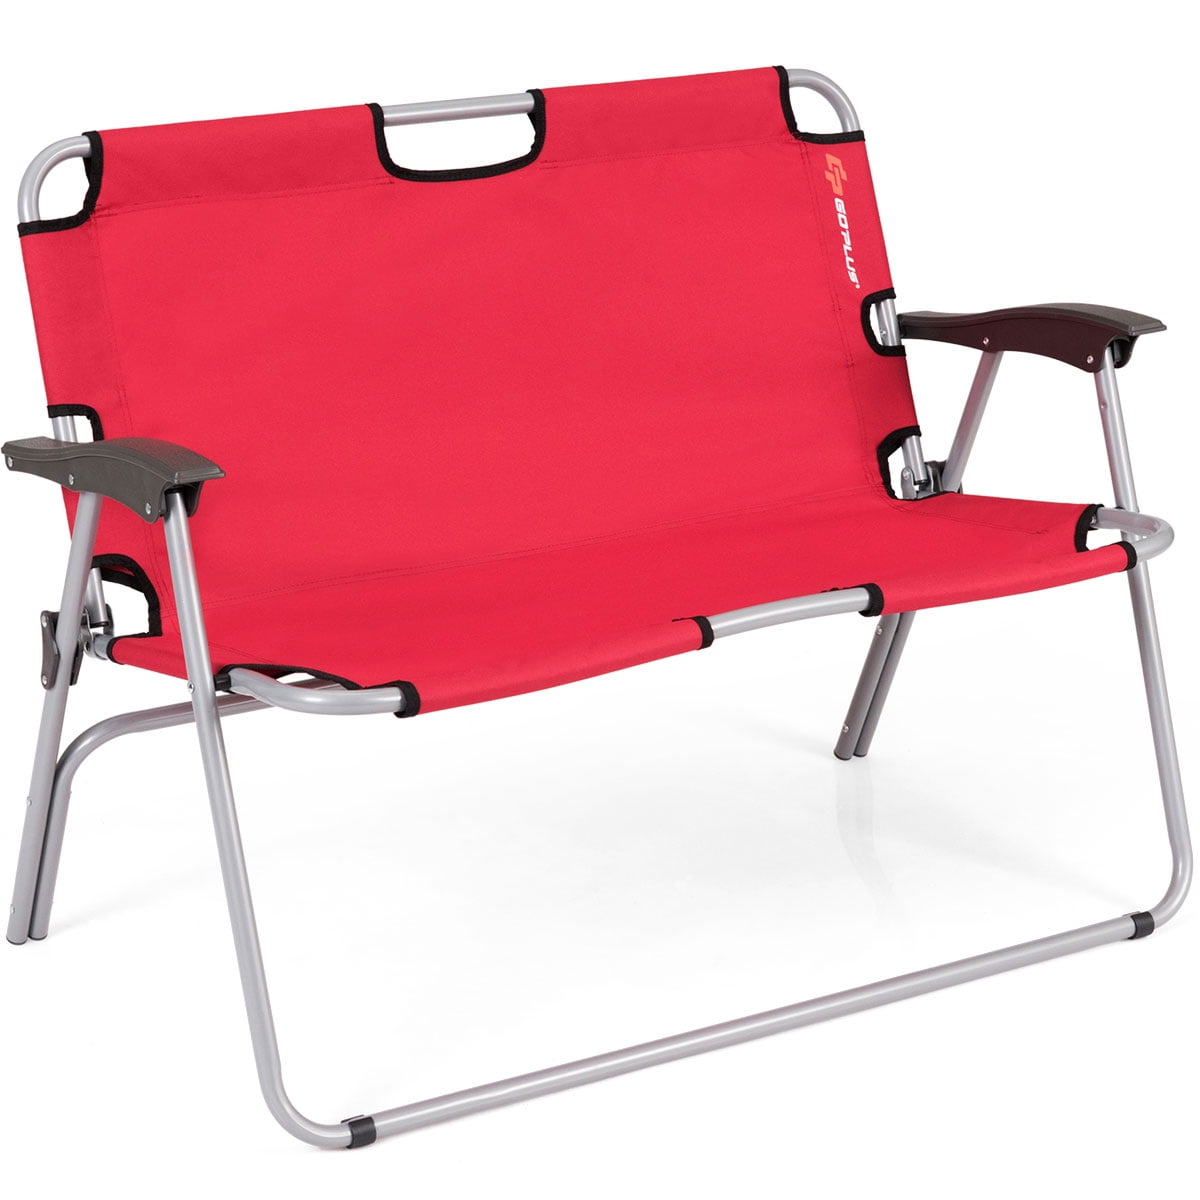 costway 2 person folding camping bench portable loveseat double chair  outdoor red  walmart